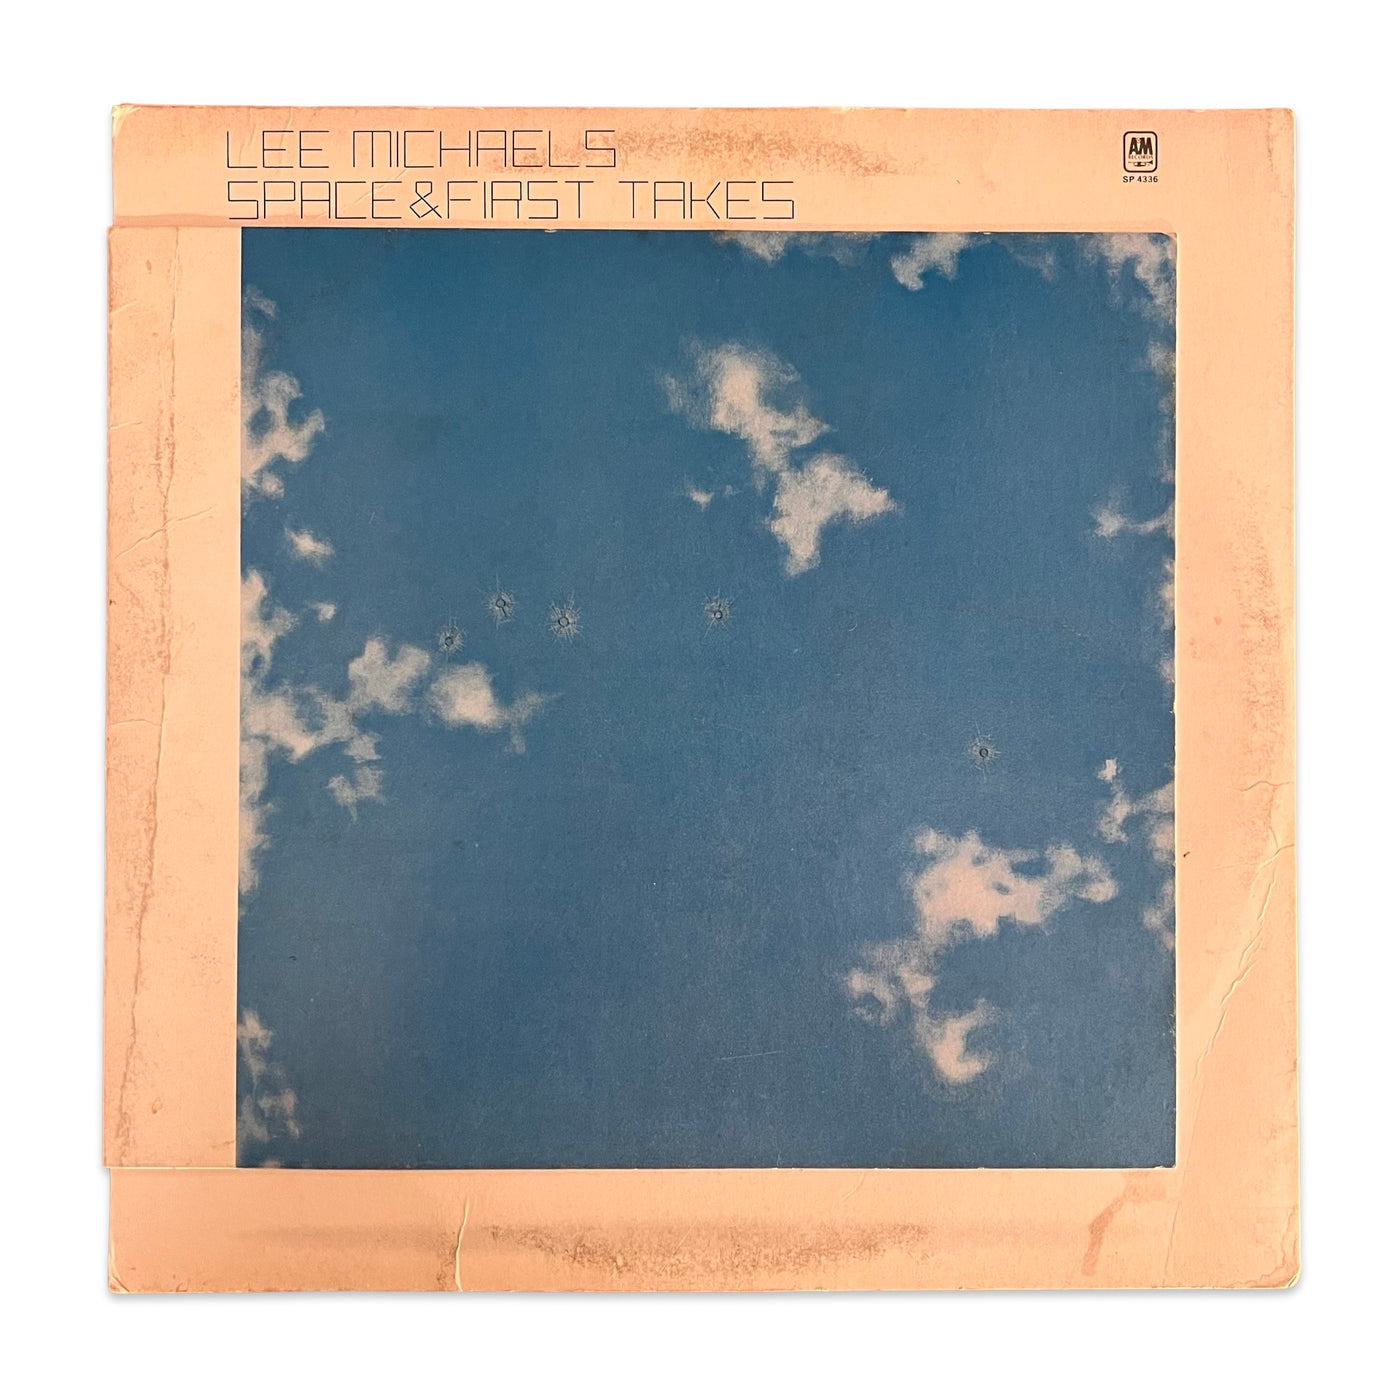 Lee Michaels – Space And First Takes (1972, Terre Haute Press)